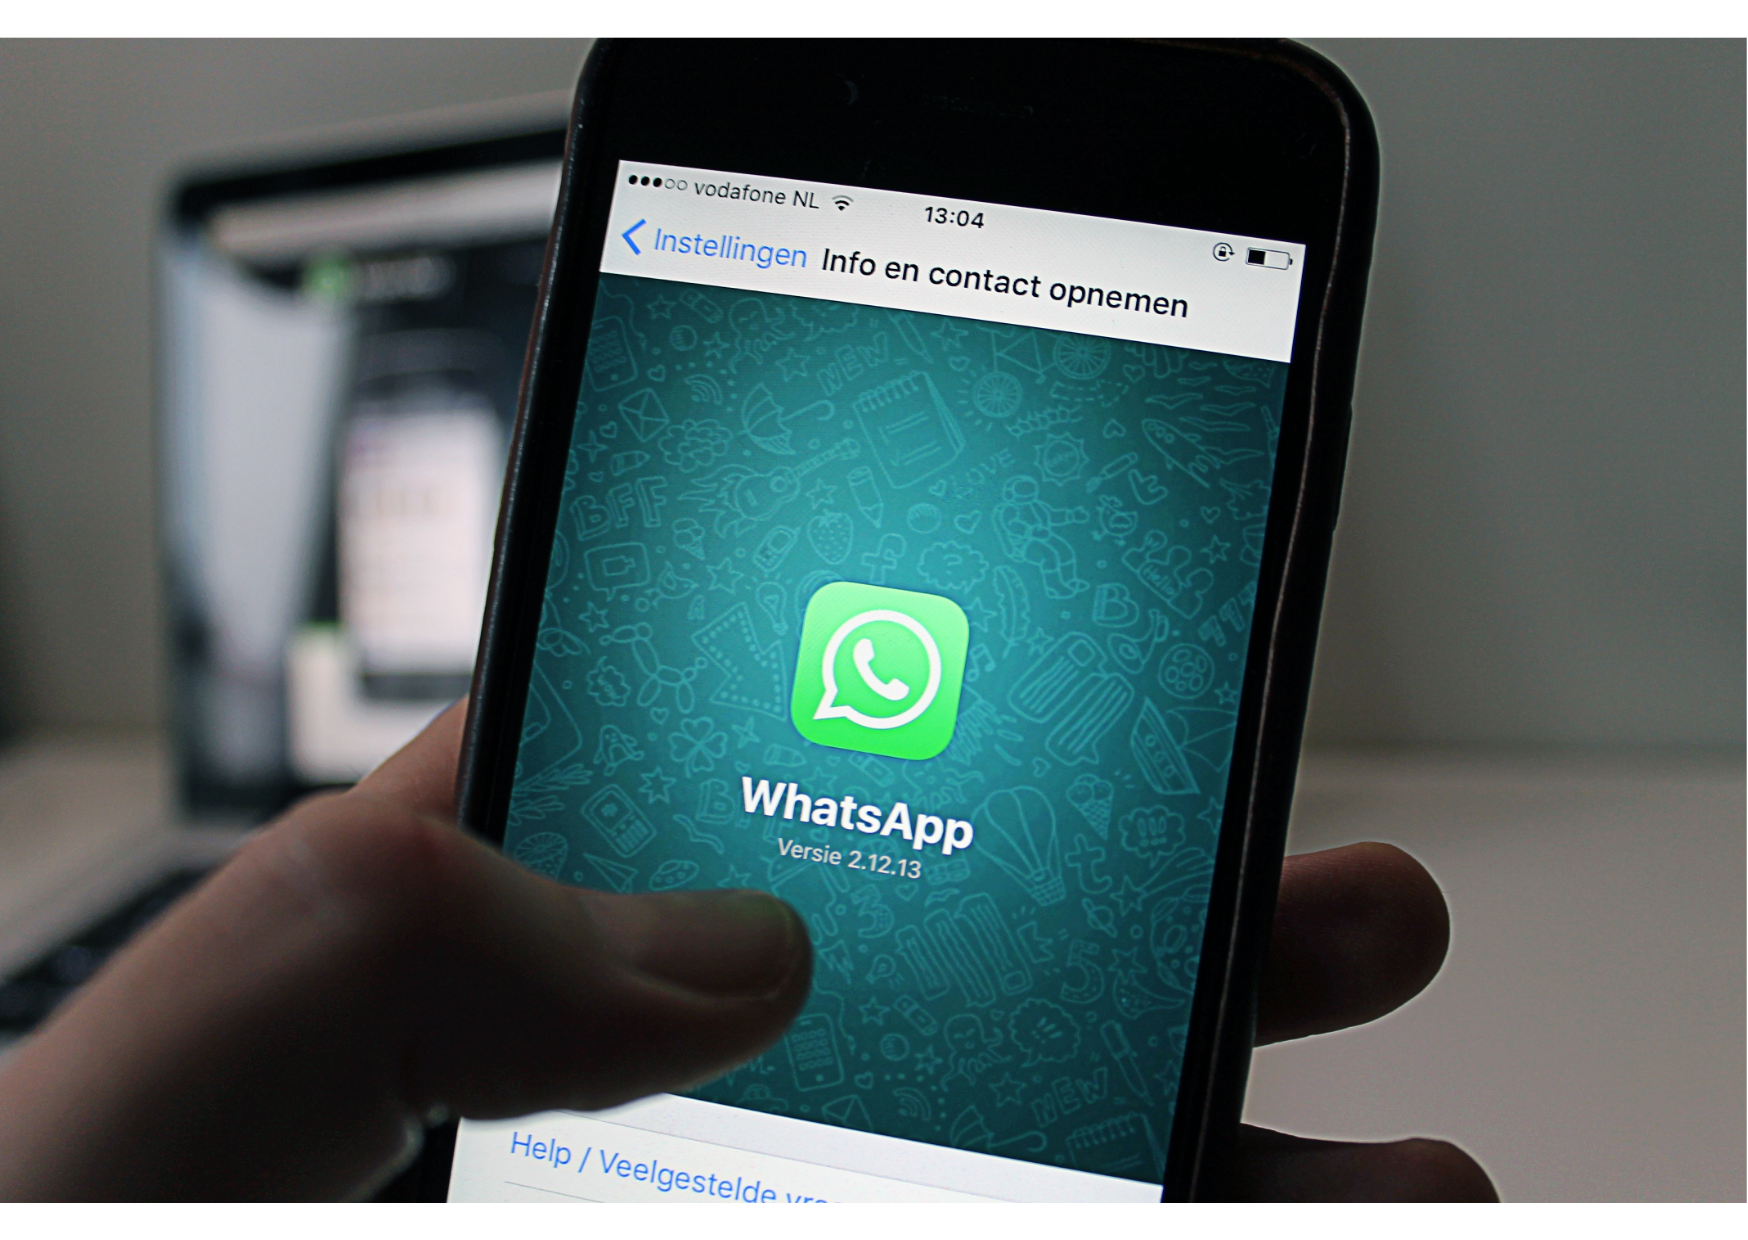 Why WhatsApp is one of the best helpdesk channels?